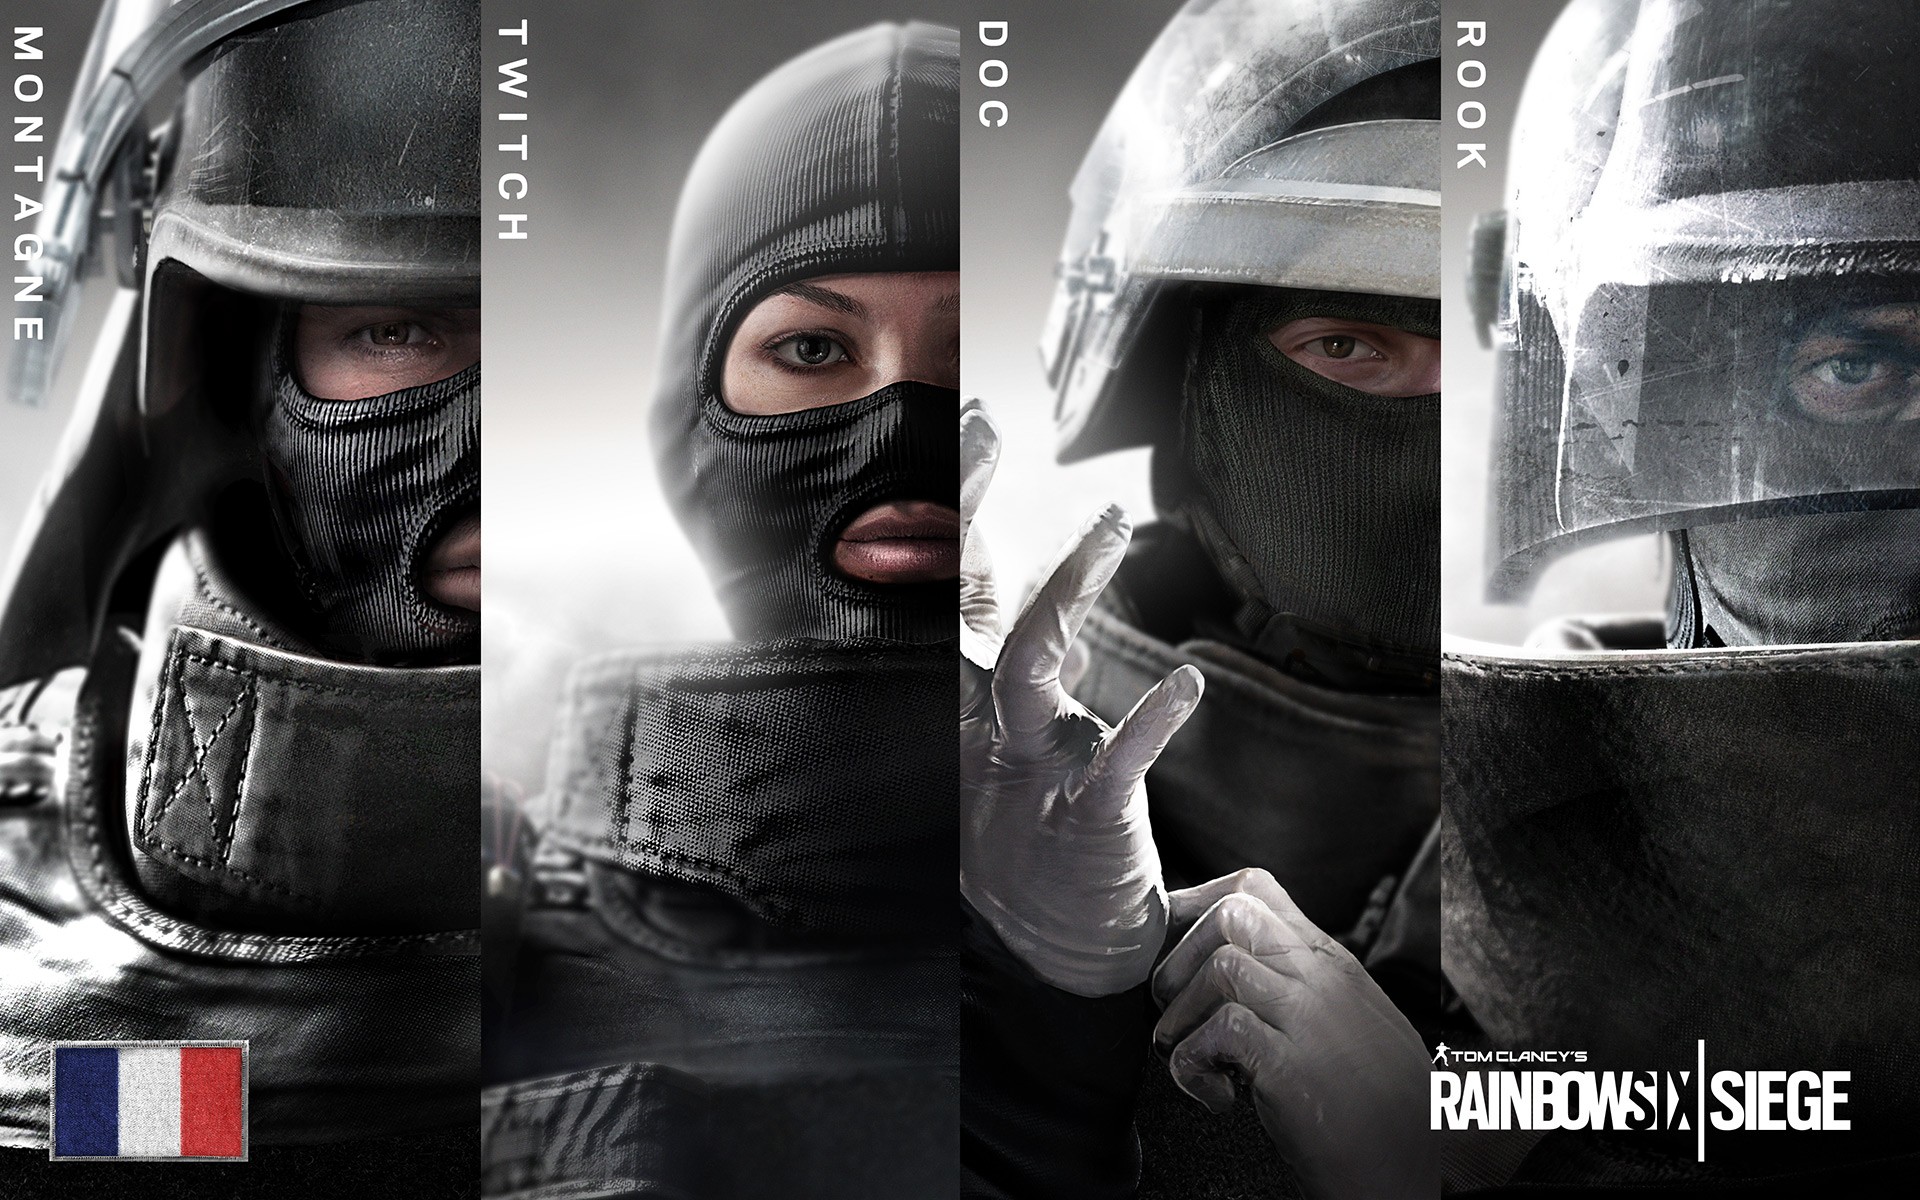 police, Rainbow Six: Siege, Video Games, Artwork, Special Forces, GIGN, Collage Wallpaper